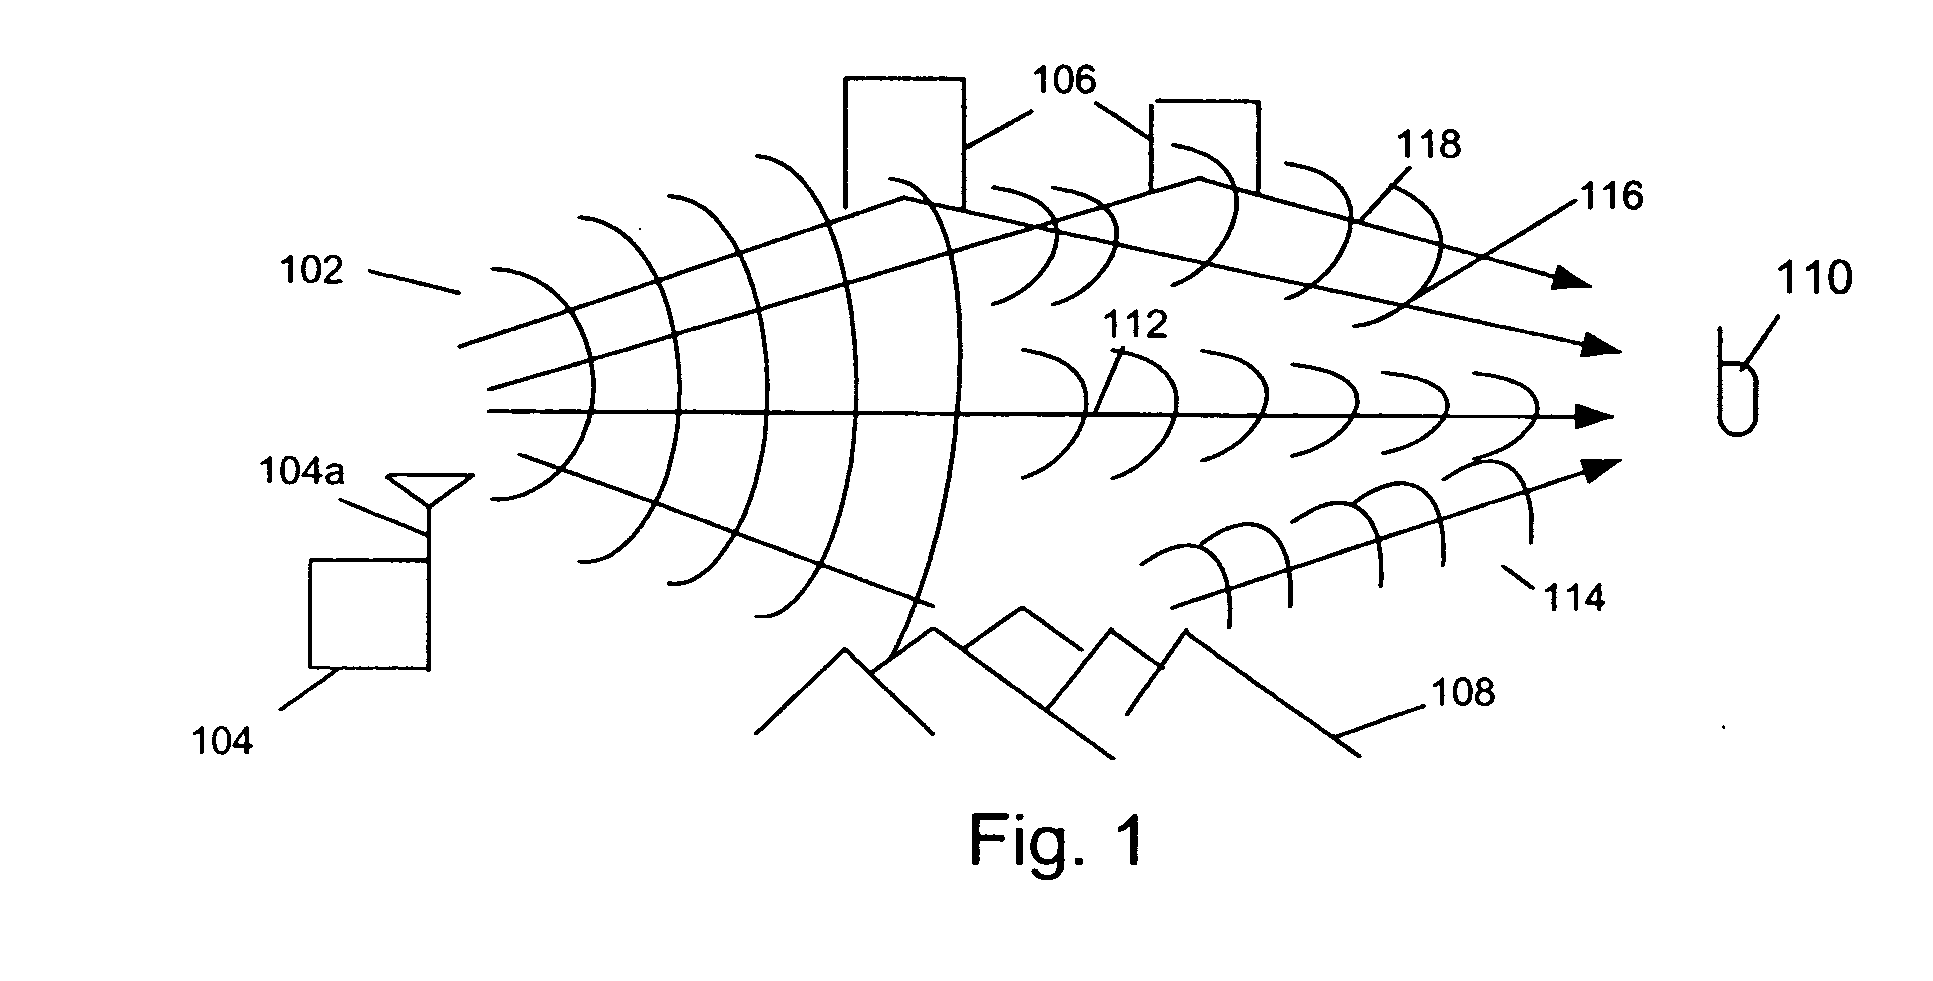 Systems and methods for testing the performance of and simulating a wireless communication device